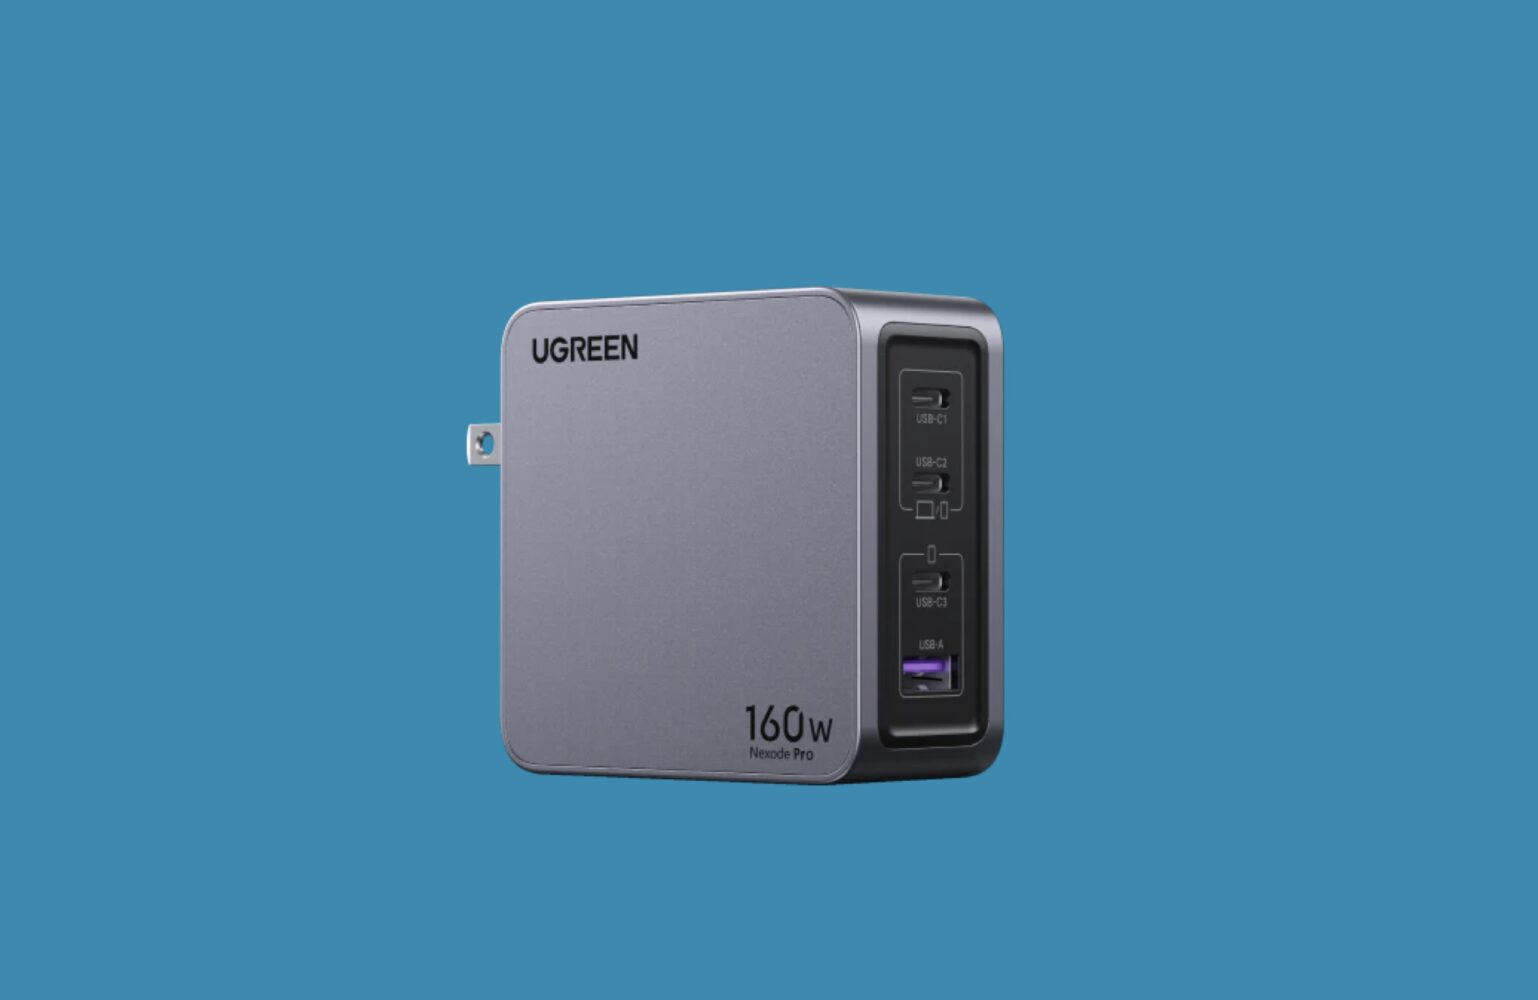 Ugreen launches its new Nexode Pro series